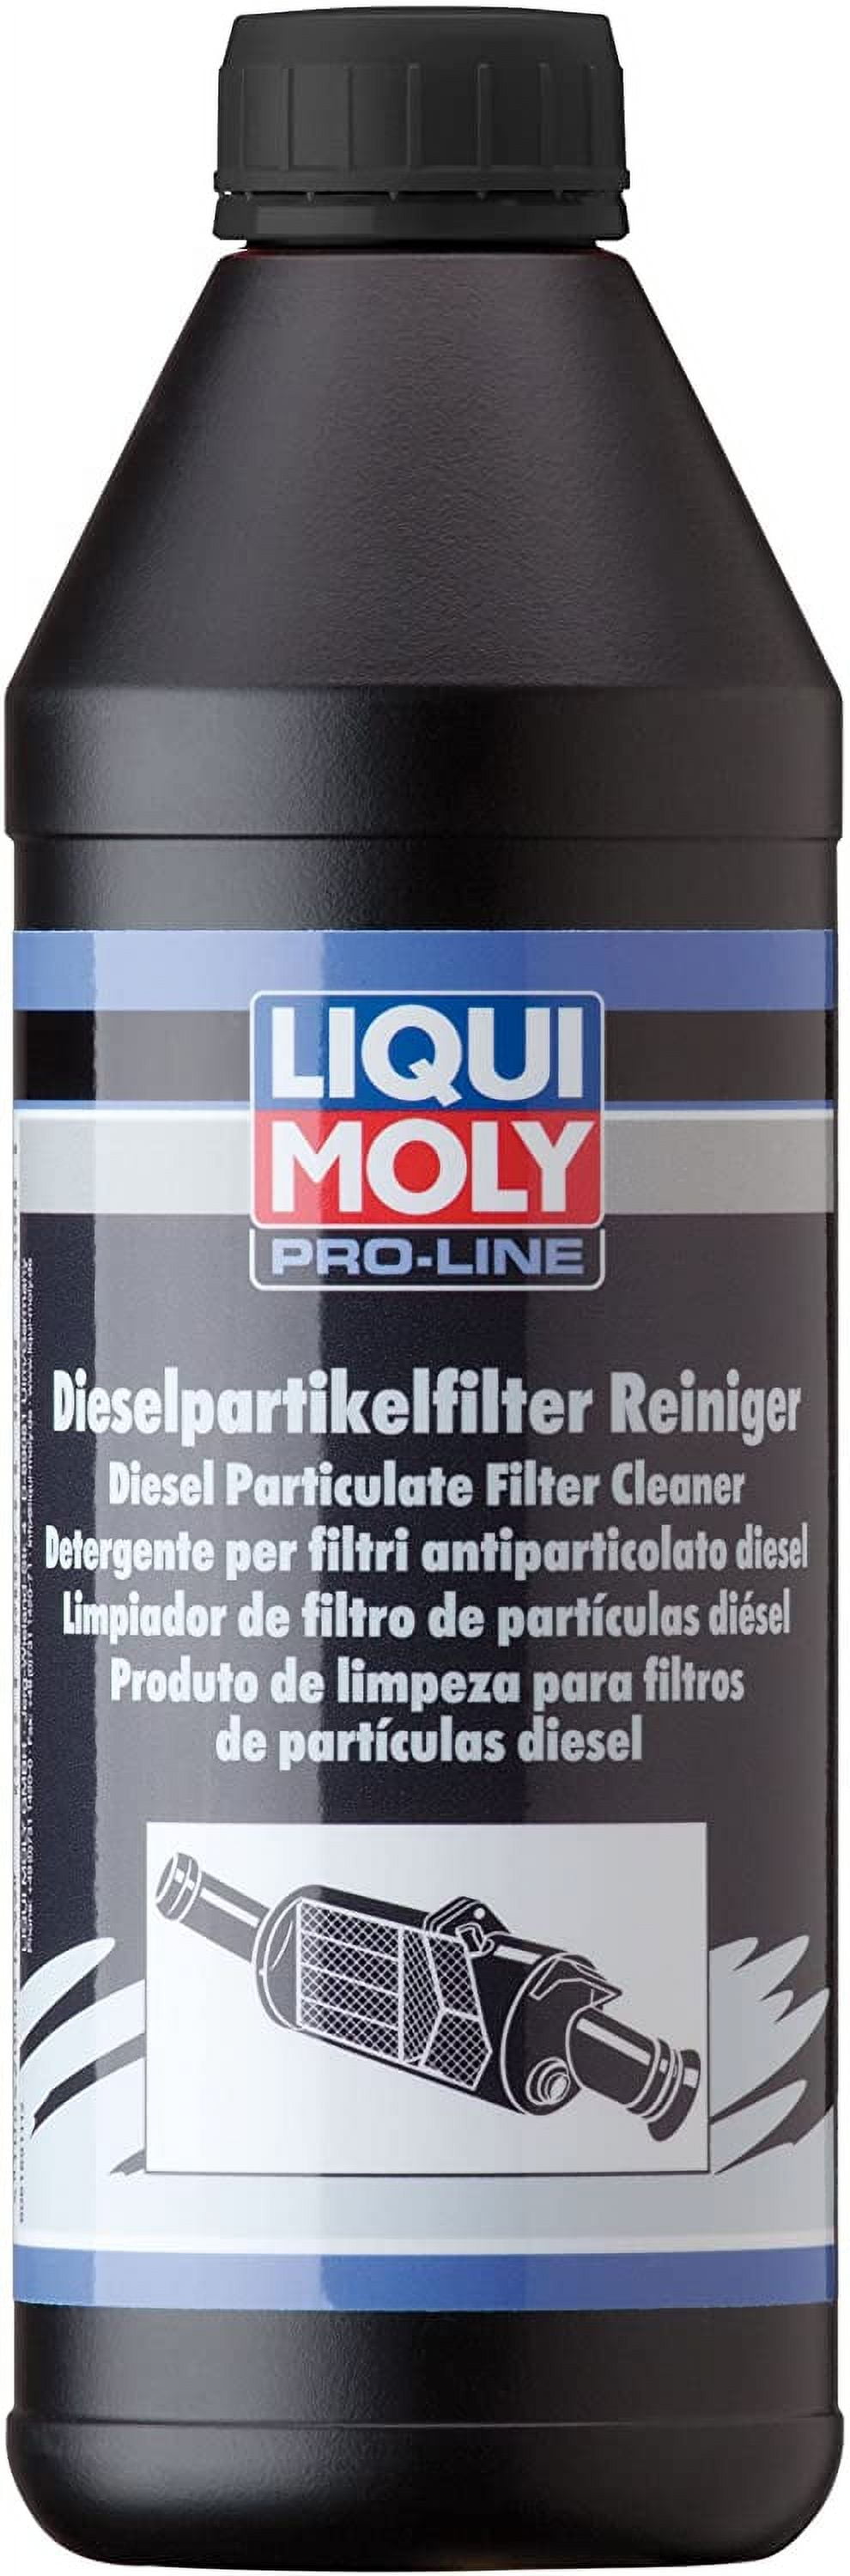 Liqui Moly 5160 Speed Diesel Additive Fuel Additive 1 L Pack of 2